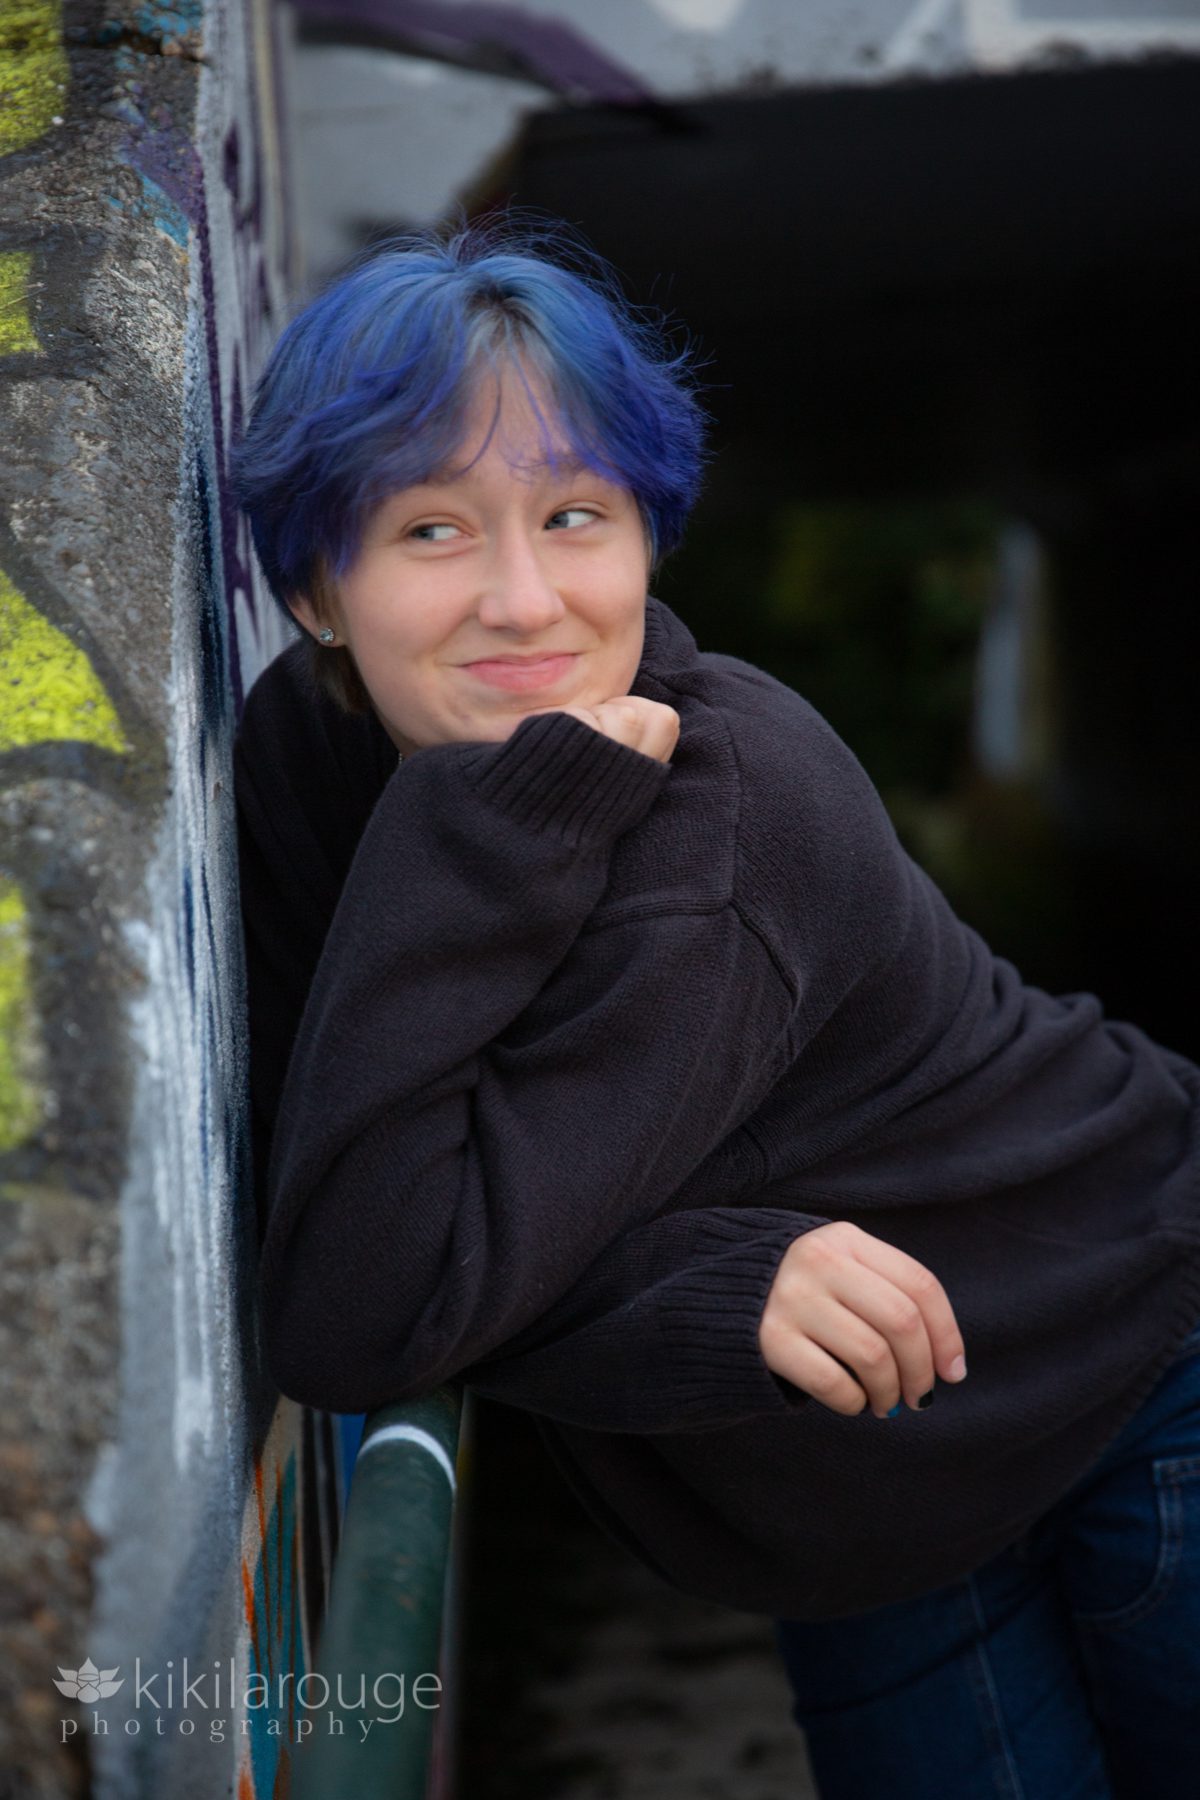 Teen with bright blue hair leaning on railing smiling